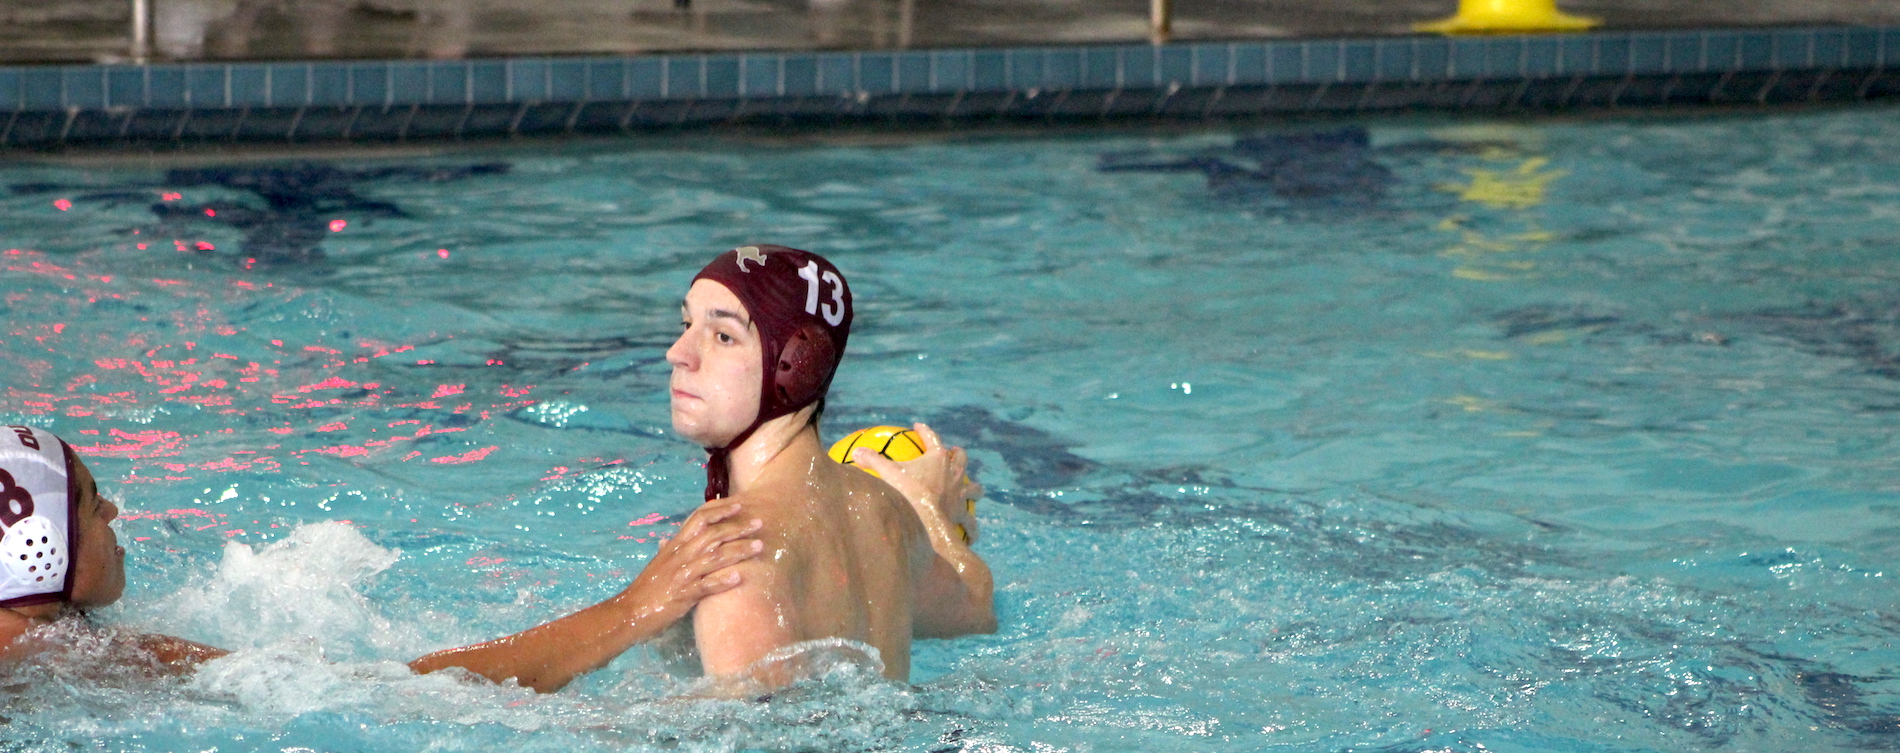 Men's Water Polo Tops Ottawa and Penn State-Behrend